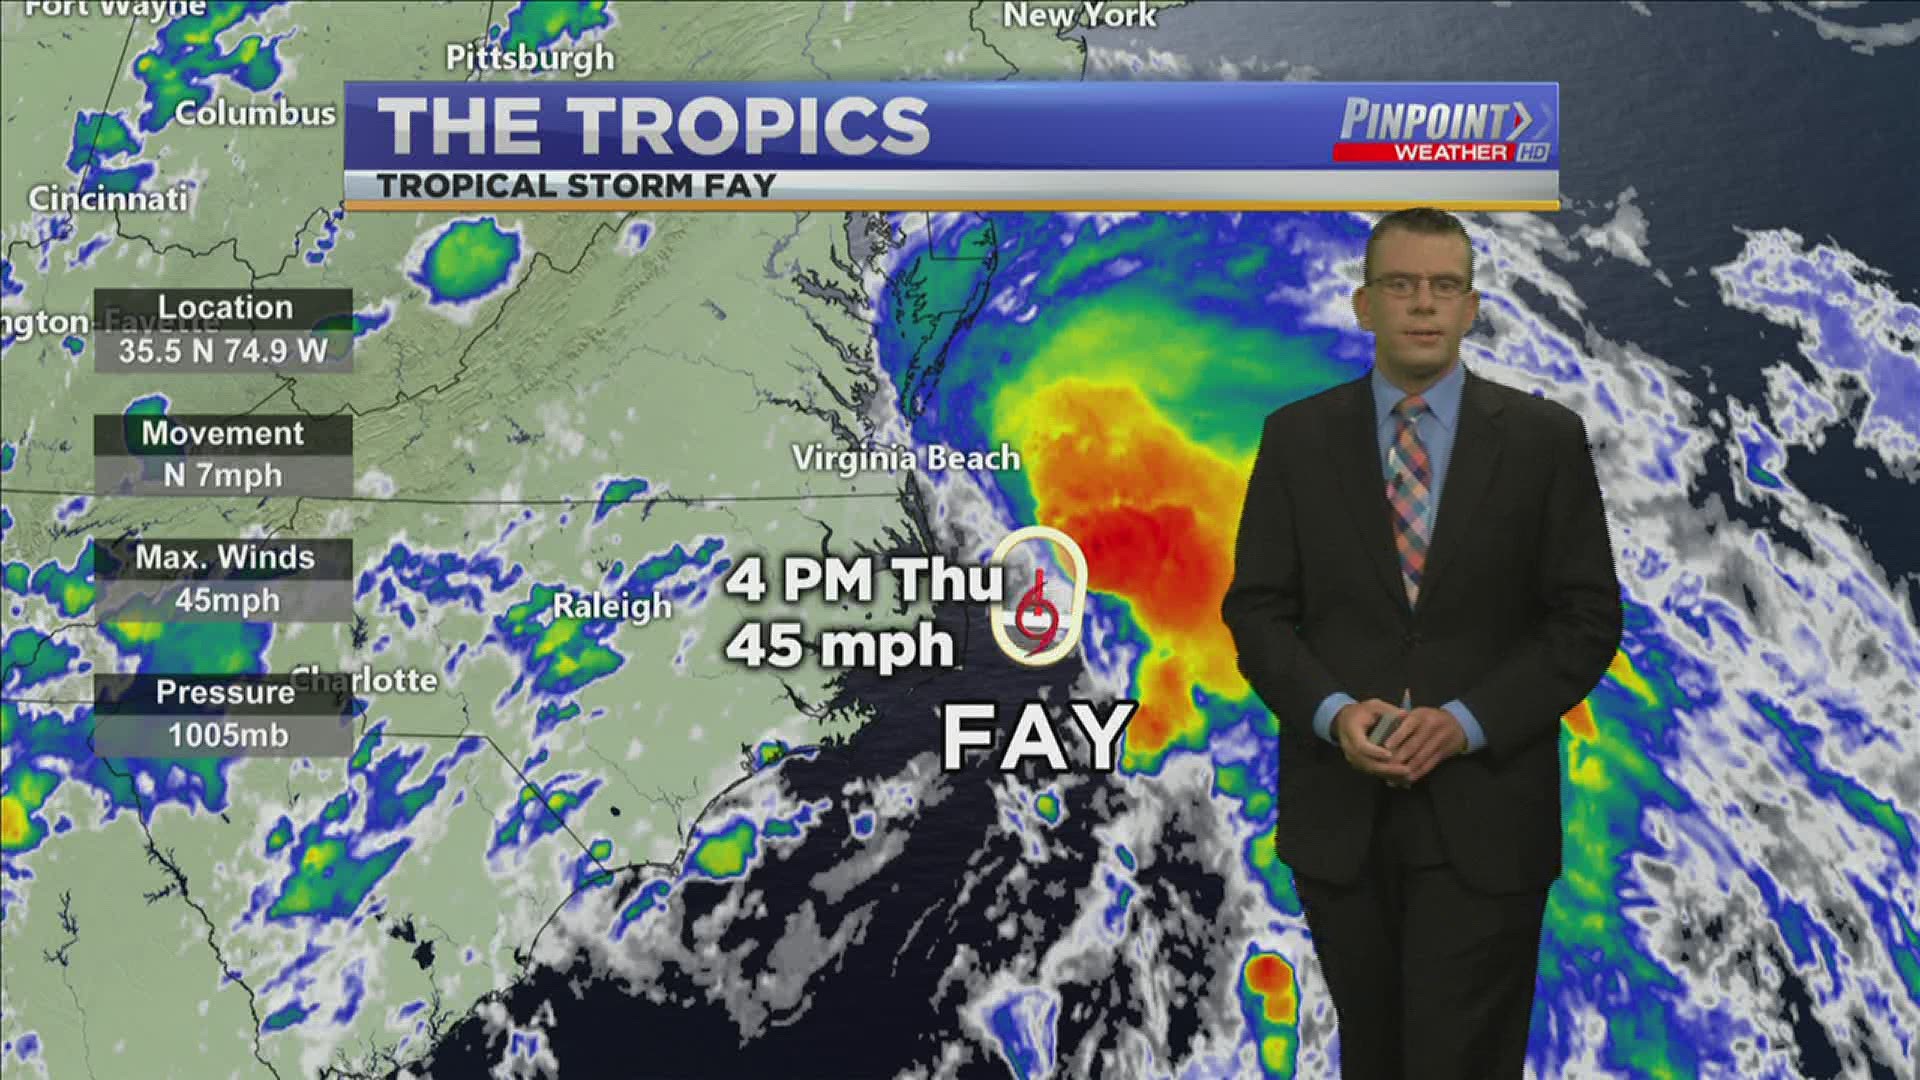 Tropical Storm Fay has developed.